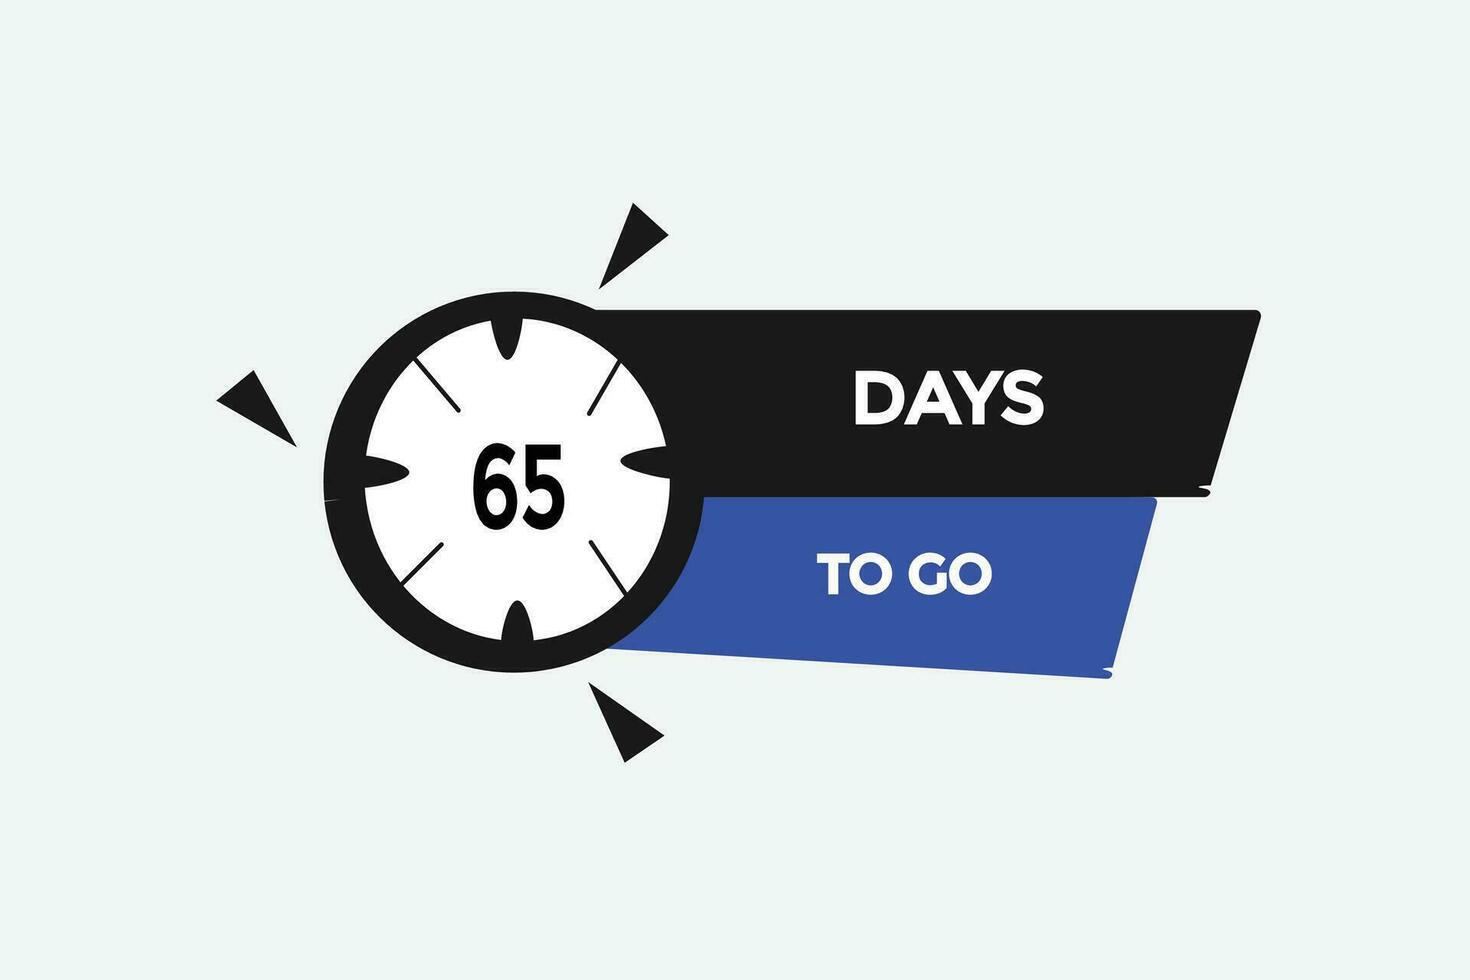 65 days, left countdown to go one time template,65  day countdown left banner label button vector